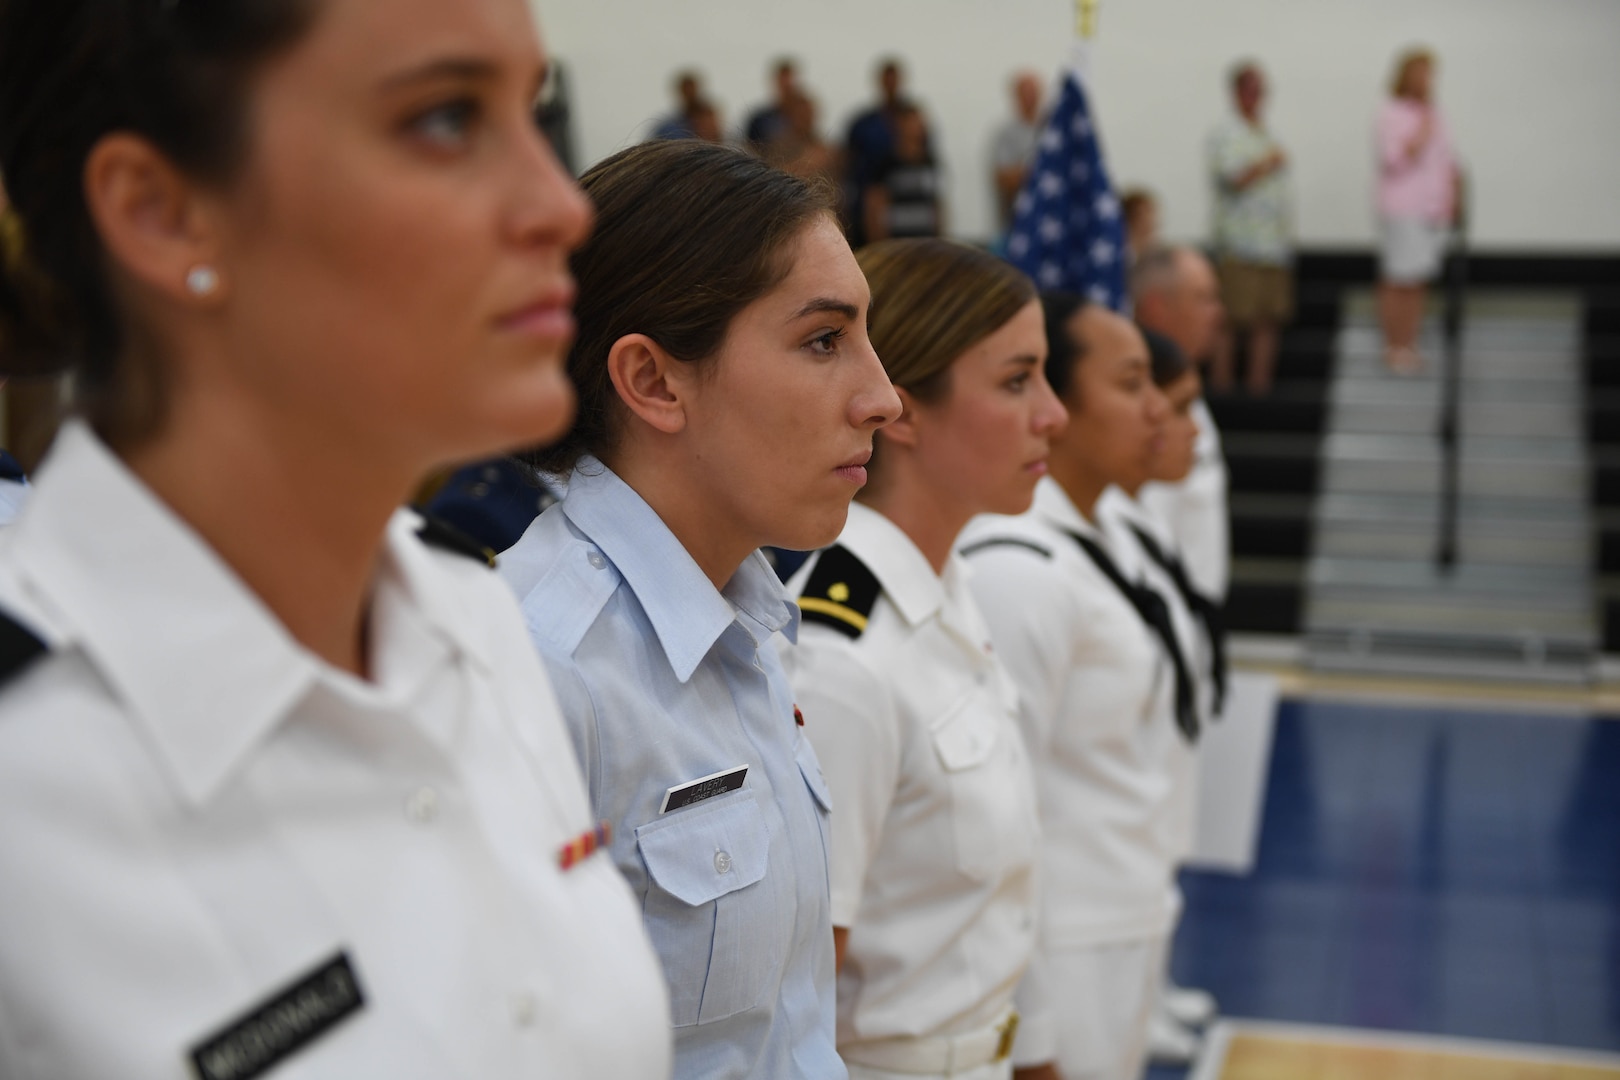 170603-N-UK306-106 JACKSONVILLE, Fla. (June 3, 2017)  Compeititors take part in the opening ceremony of the 18th Conseil International du Sport Militaire (CISM) World Military Women's Volleyball Championship at Naval Station Mayport.  Teams from the United States, Canada, China, Germany and The Netherlands will compete June 4-9, while promoting peace activities and solidarity among athletes. (U.S. Navy photo by Mass Communication Specialist 2nd Class Timothy Schumaker/Released)